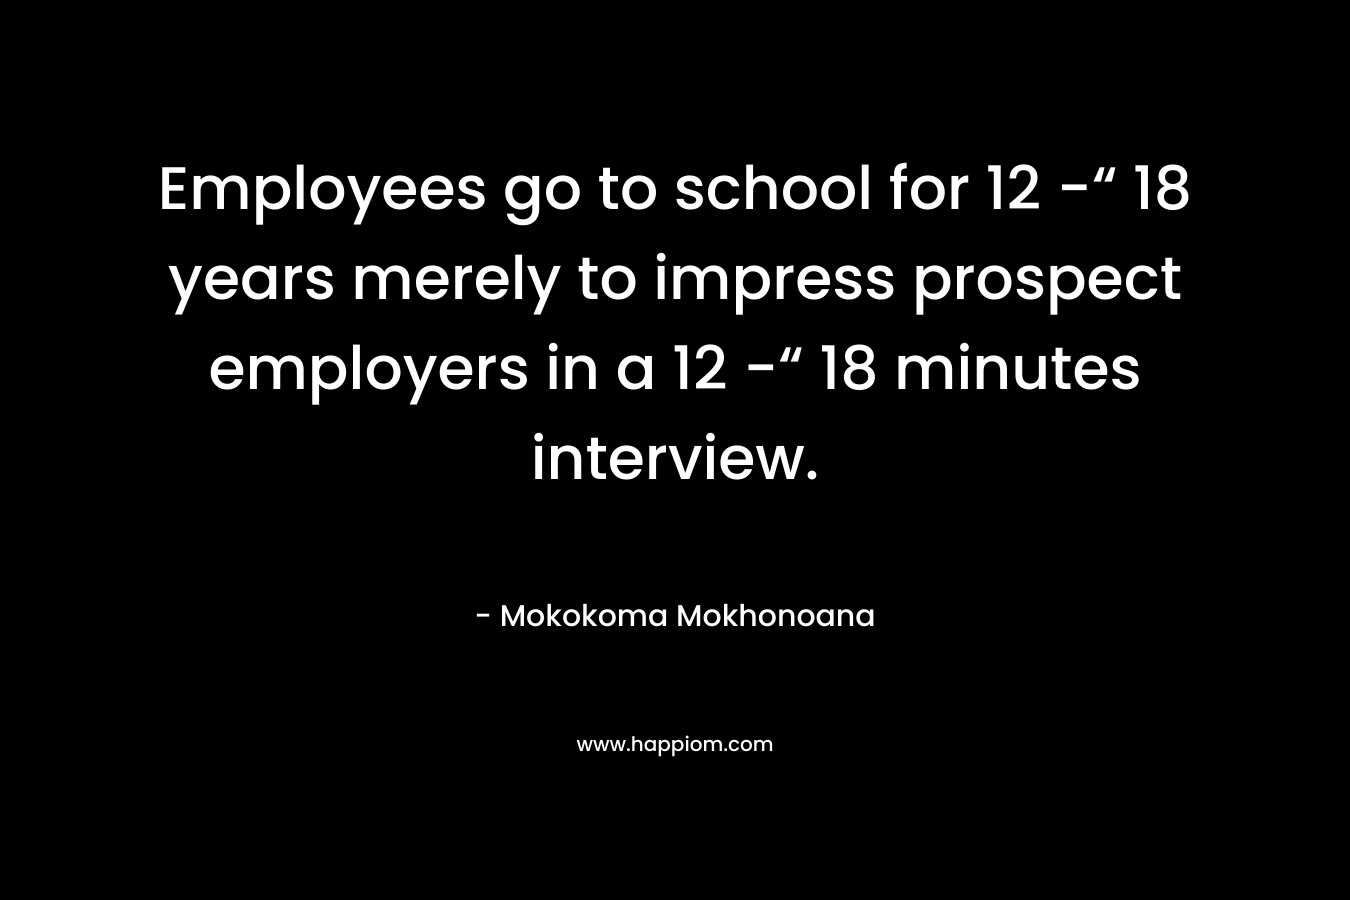 Employees go to school for 12 -“ 18 years merely to impress prospect employers in a 12 -“ 18 minutes interview. – Mokokoma Mokhonoana